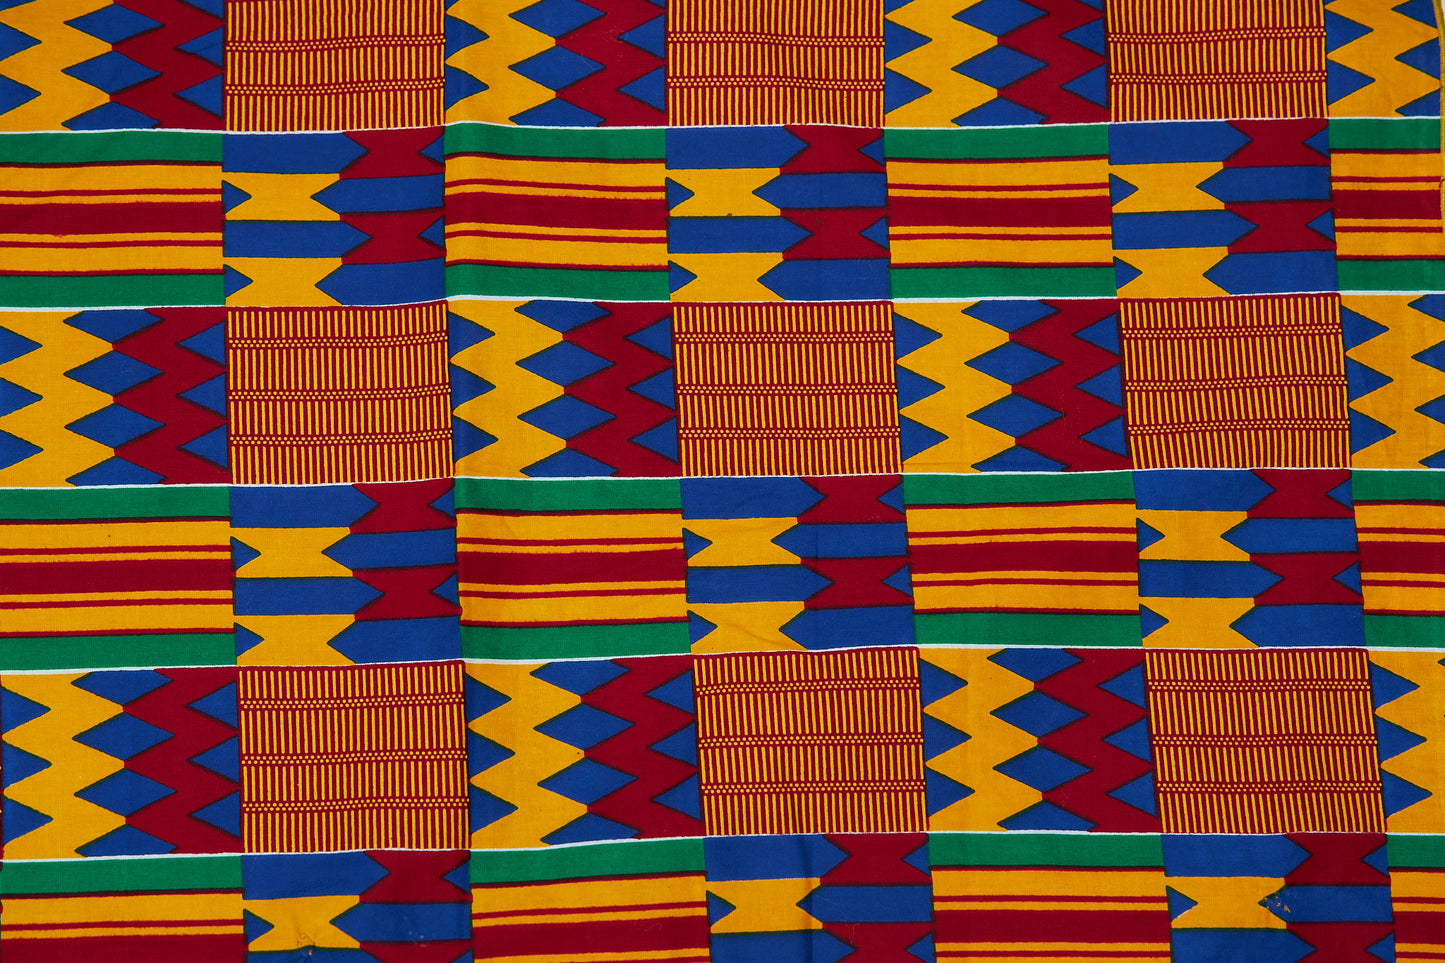 Ghanaian Print Kente High Quality Cotton Wax,made of Red, Blue, Yellow And Green Colourful Adinkira Symbols Detachable Silklined Headwrap